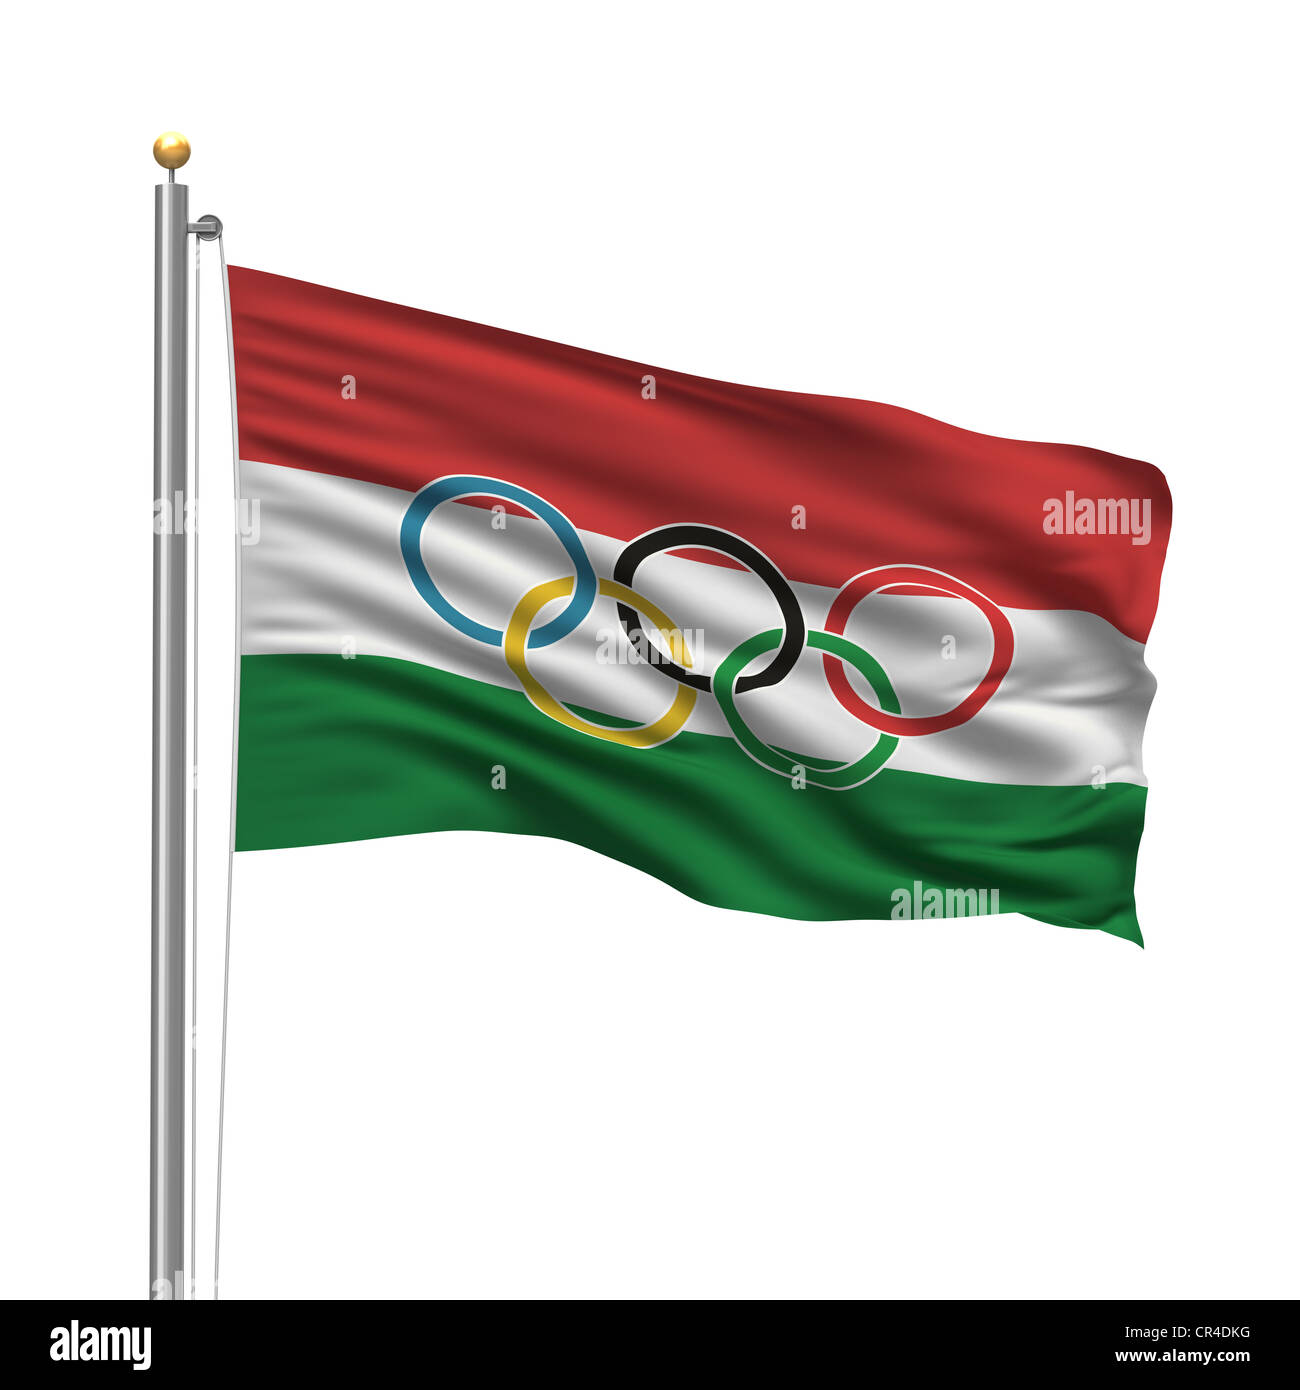 Flag of Hungary with Olympic rings Stock Photo